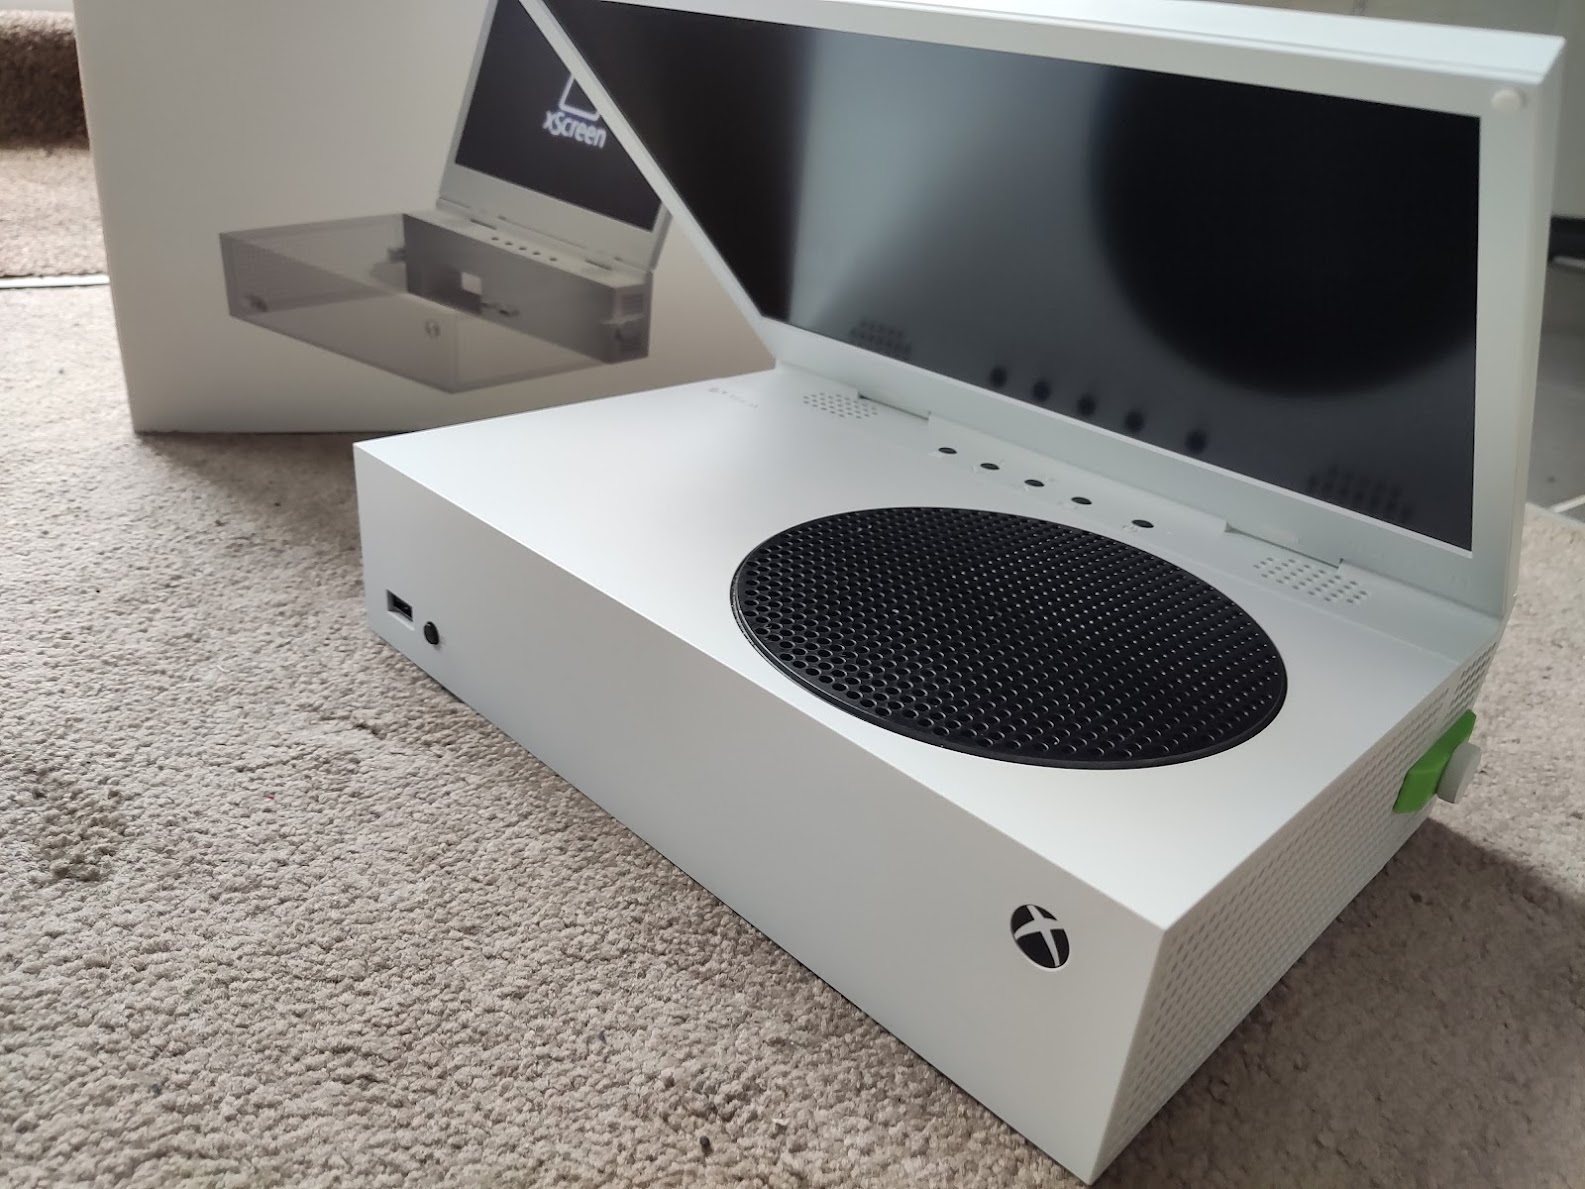 xScreen for Xbox Series S review: fun for travelling gamers